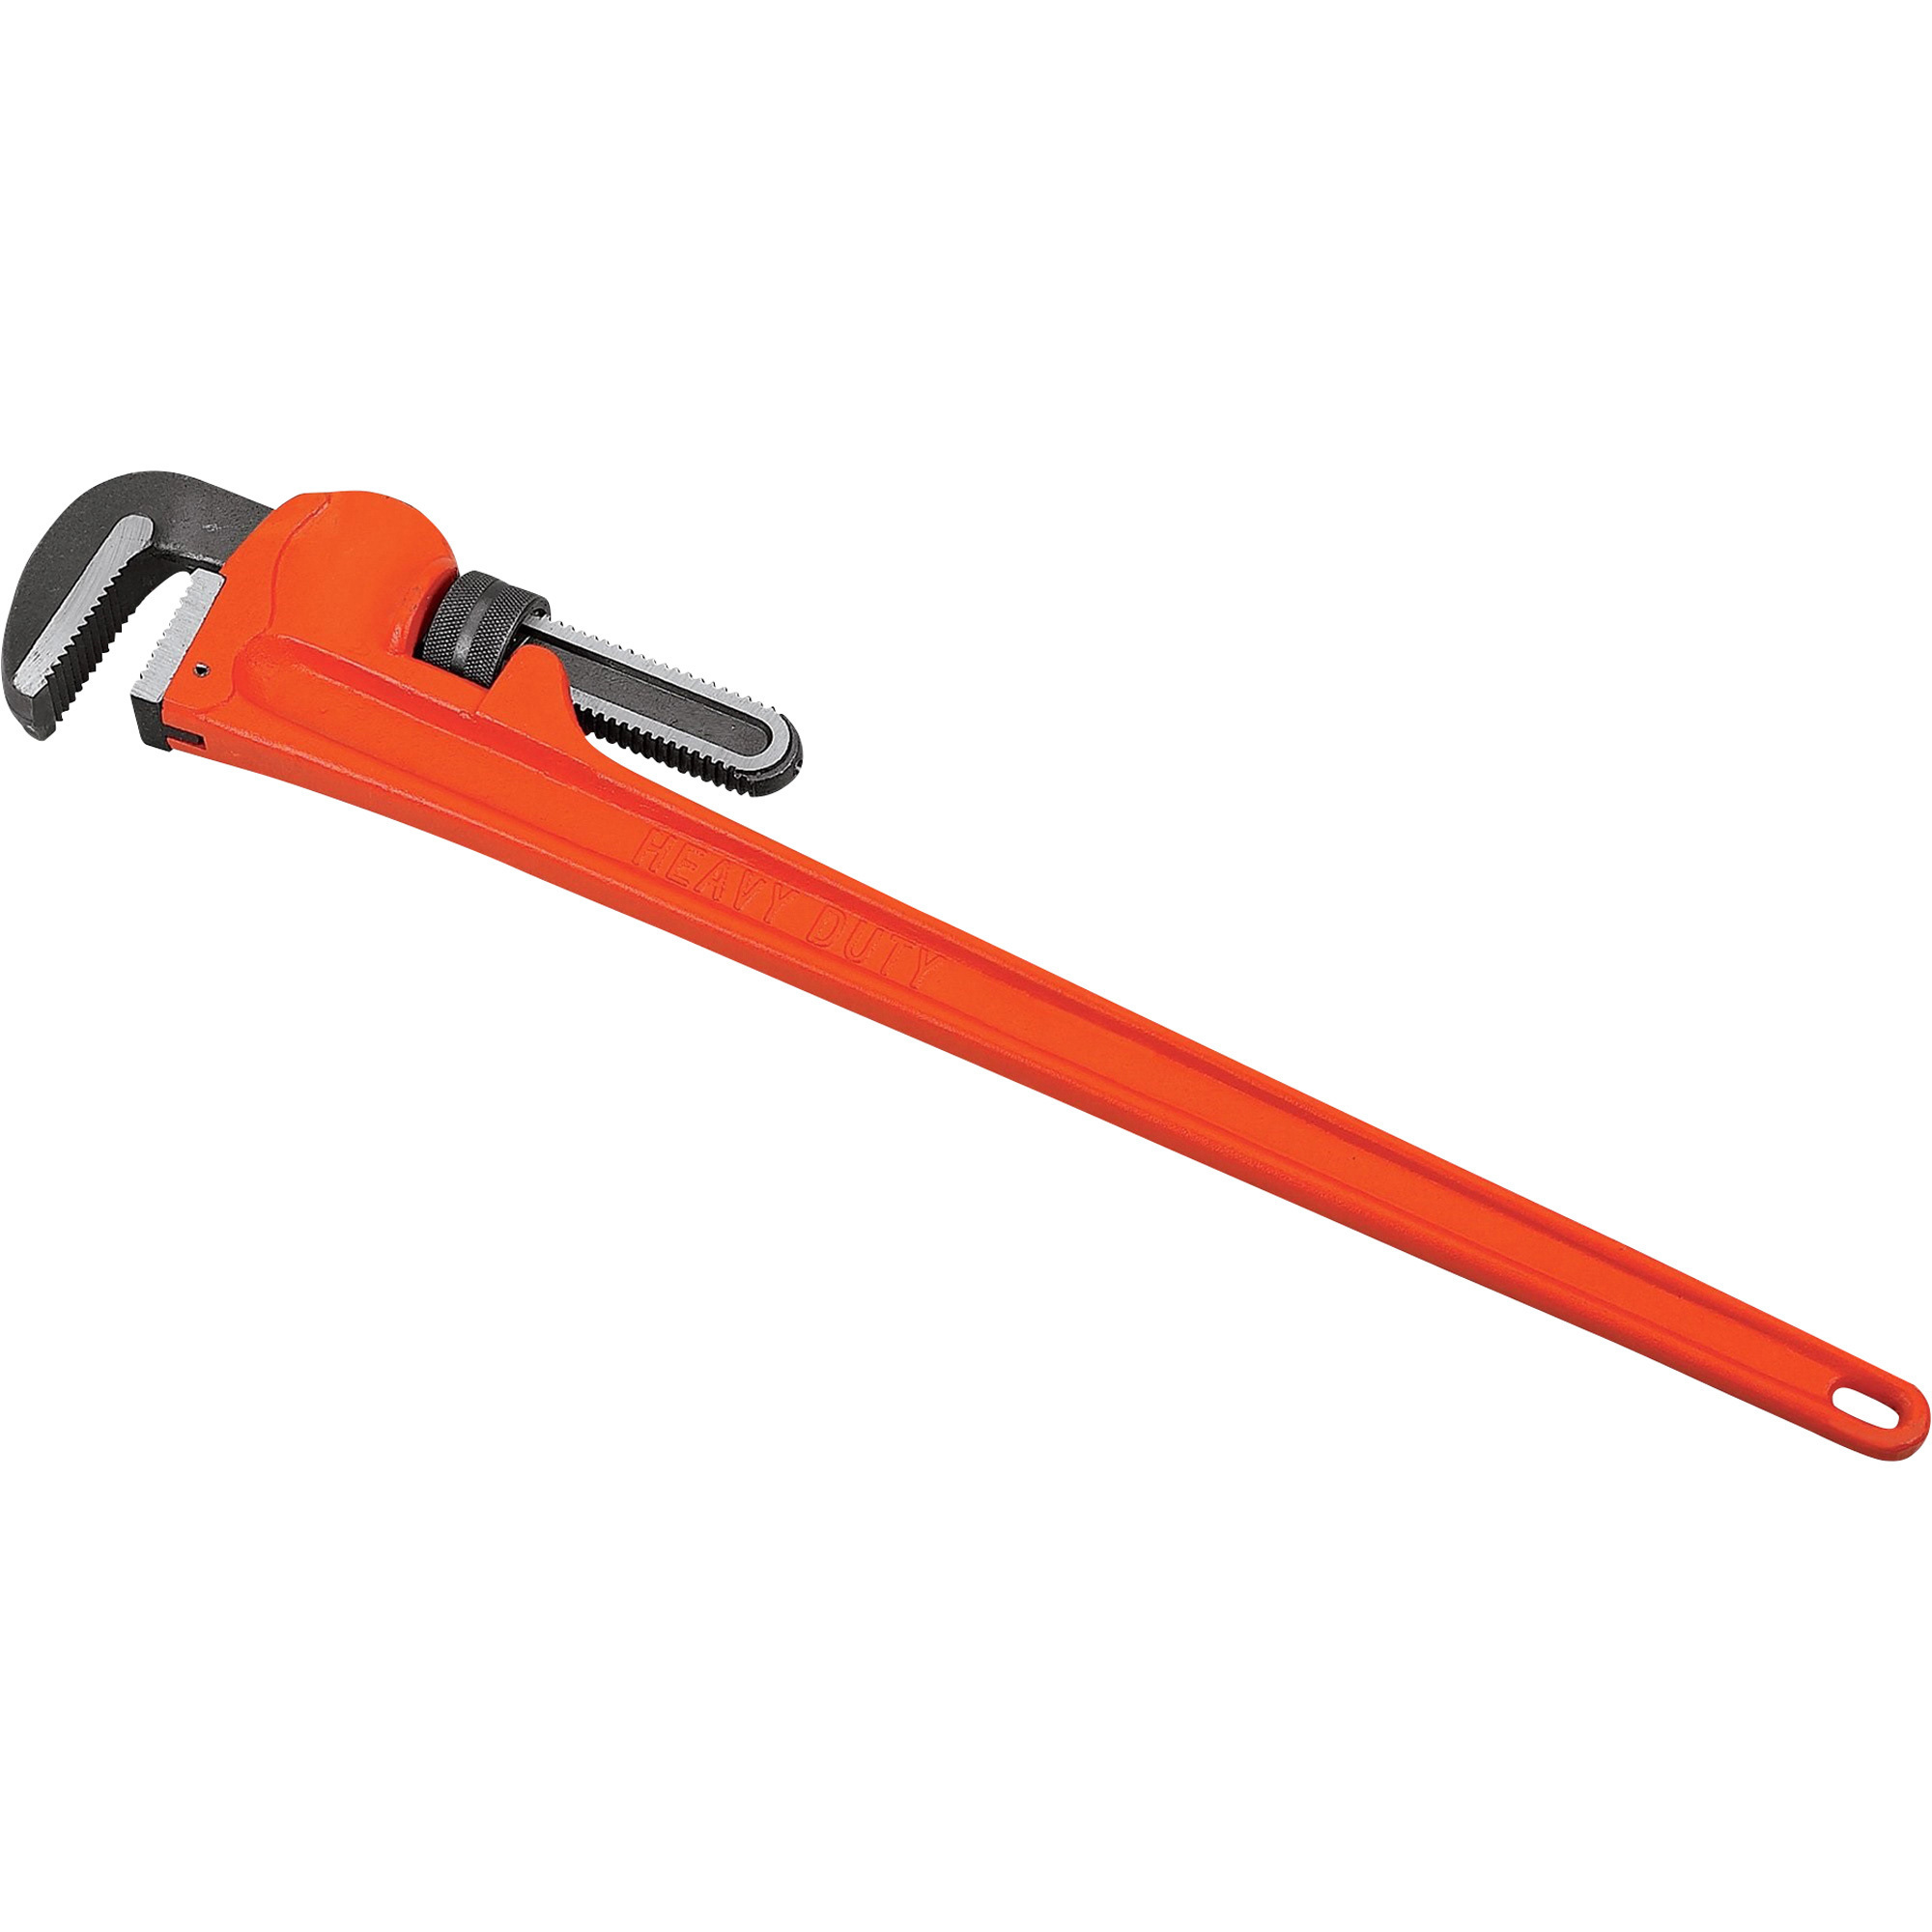 Klutch Pipe Wrench, 14Inch, Model 73279